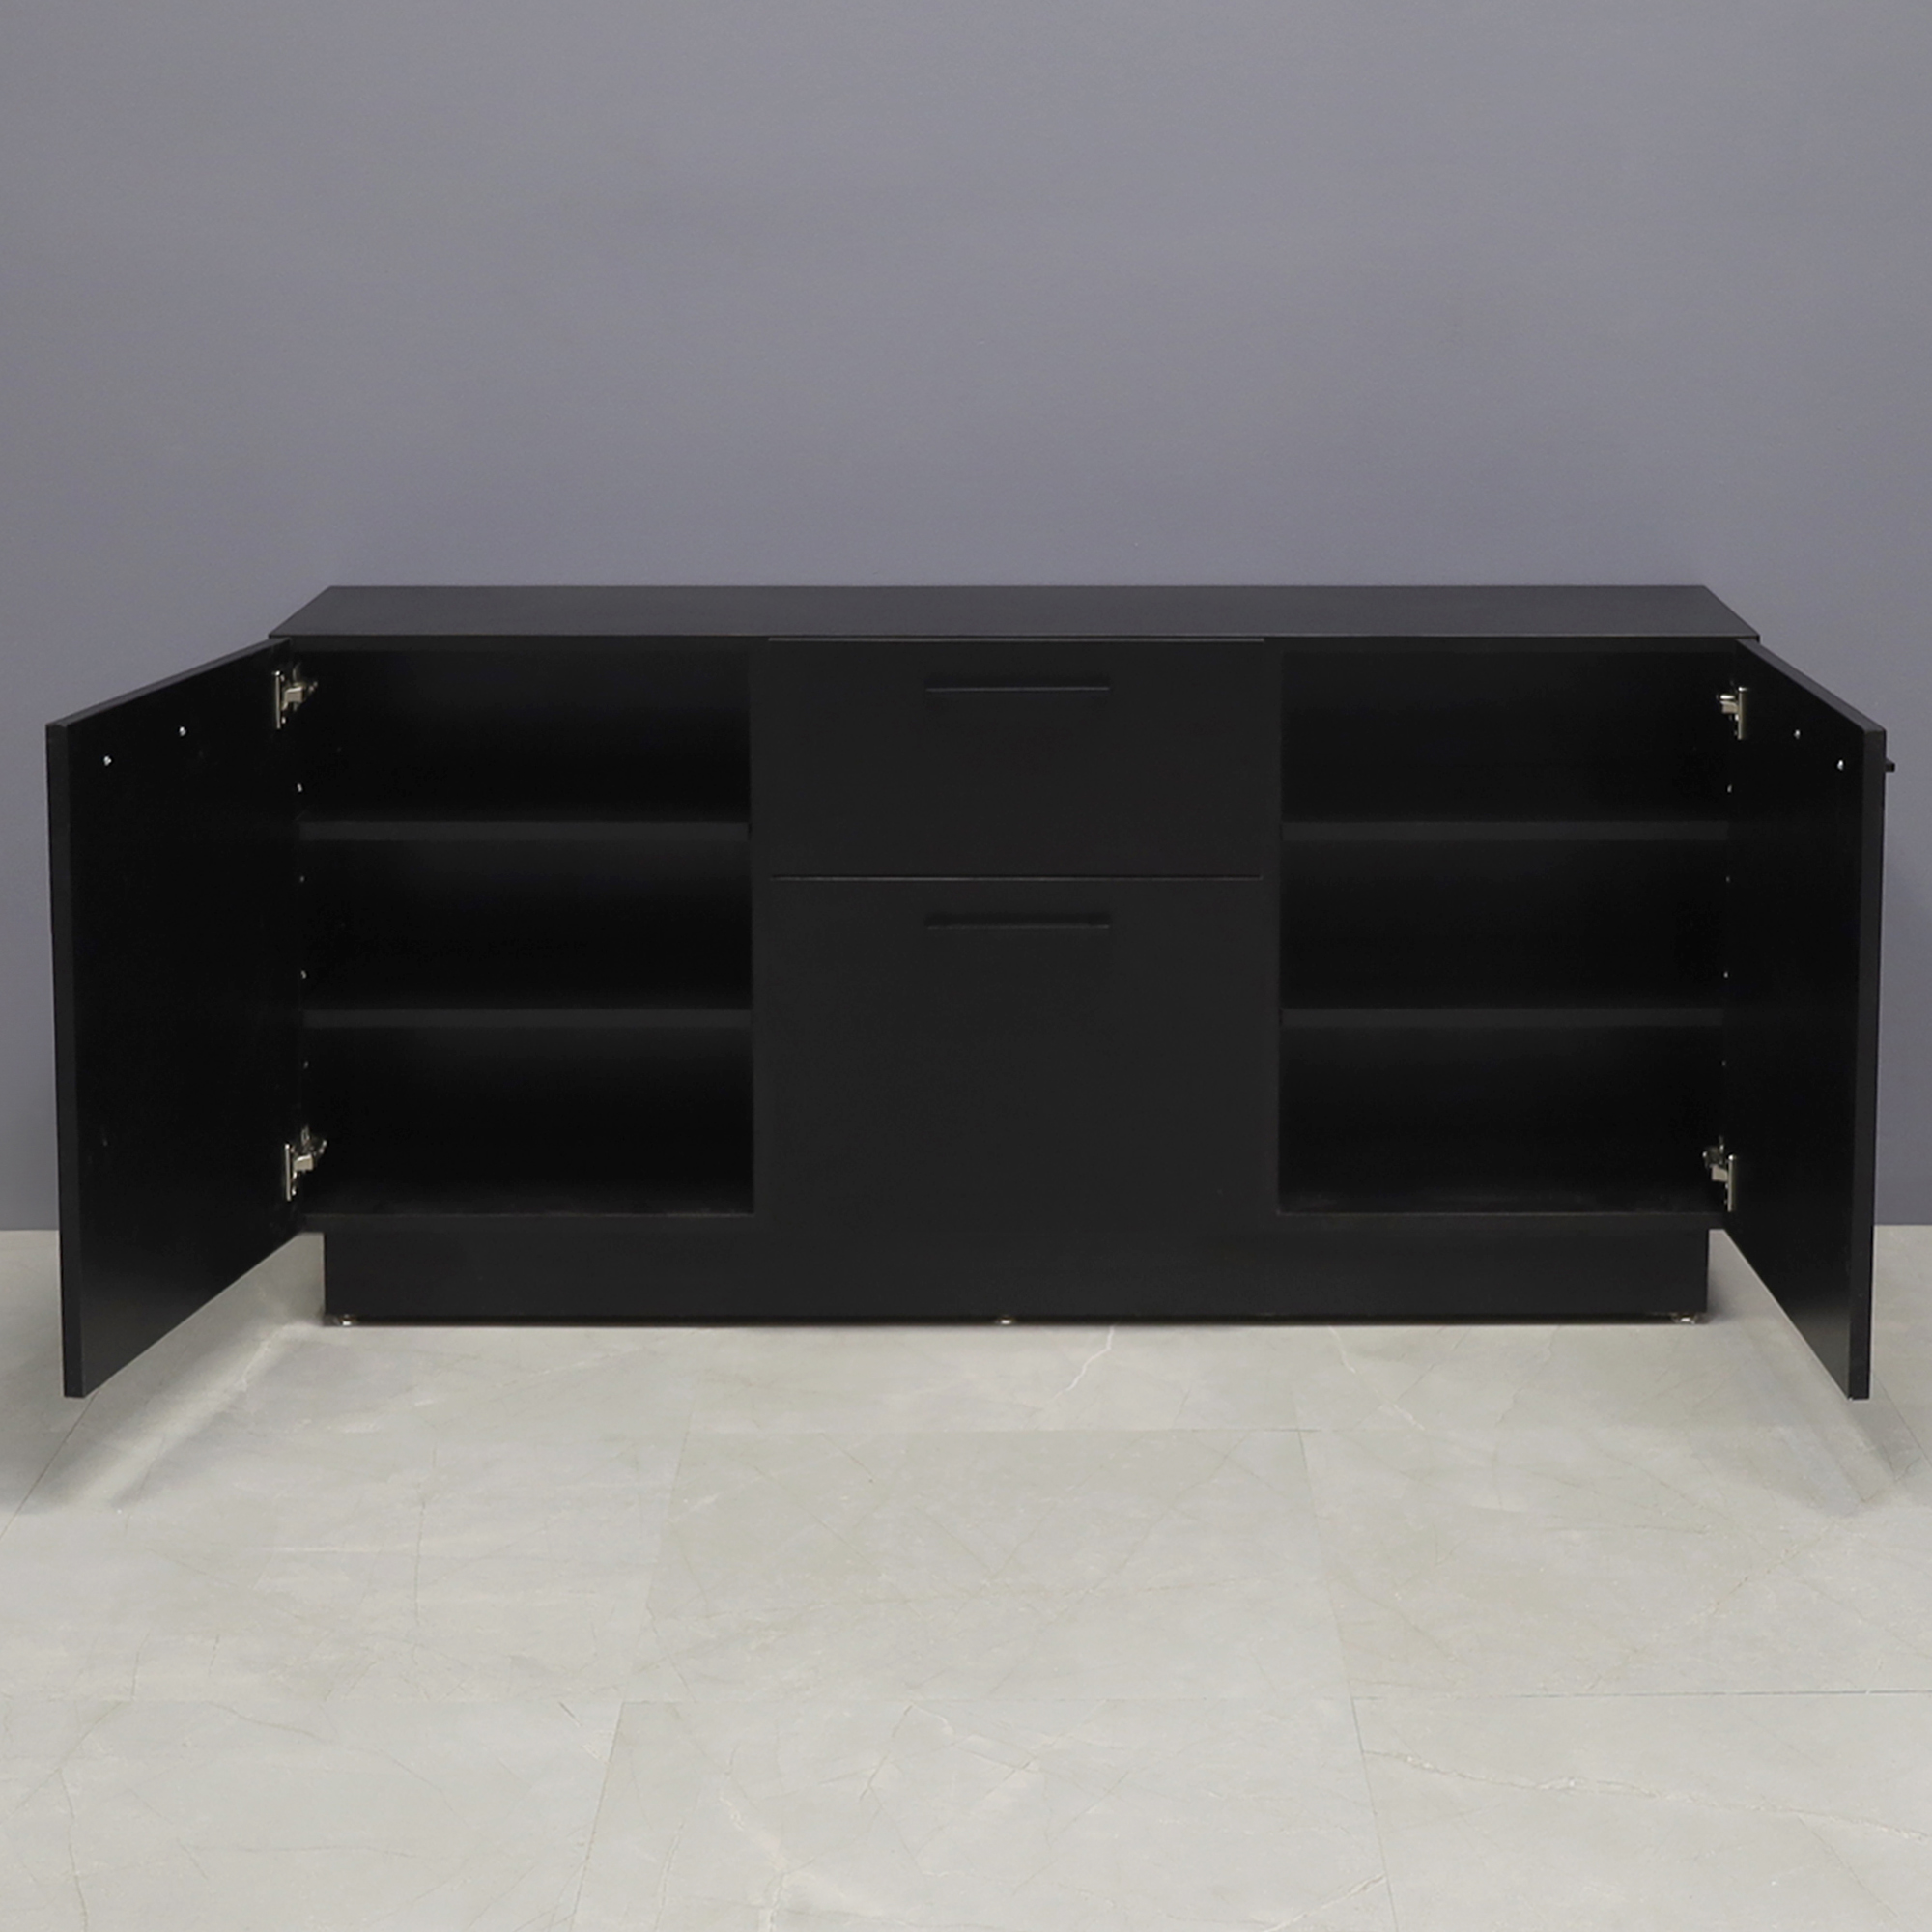 60-inch Manhattan Storage Credenza in black matte laminate credenza, front drawers & doors, and toe-kick, shown here. 